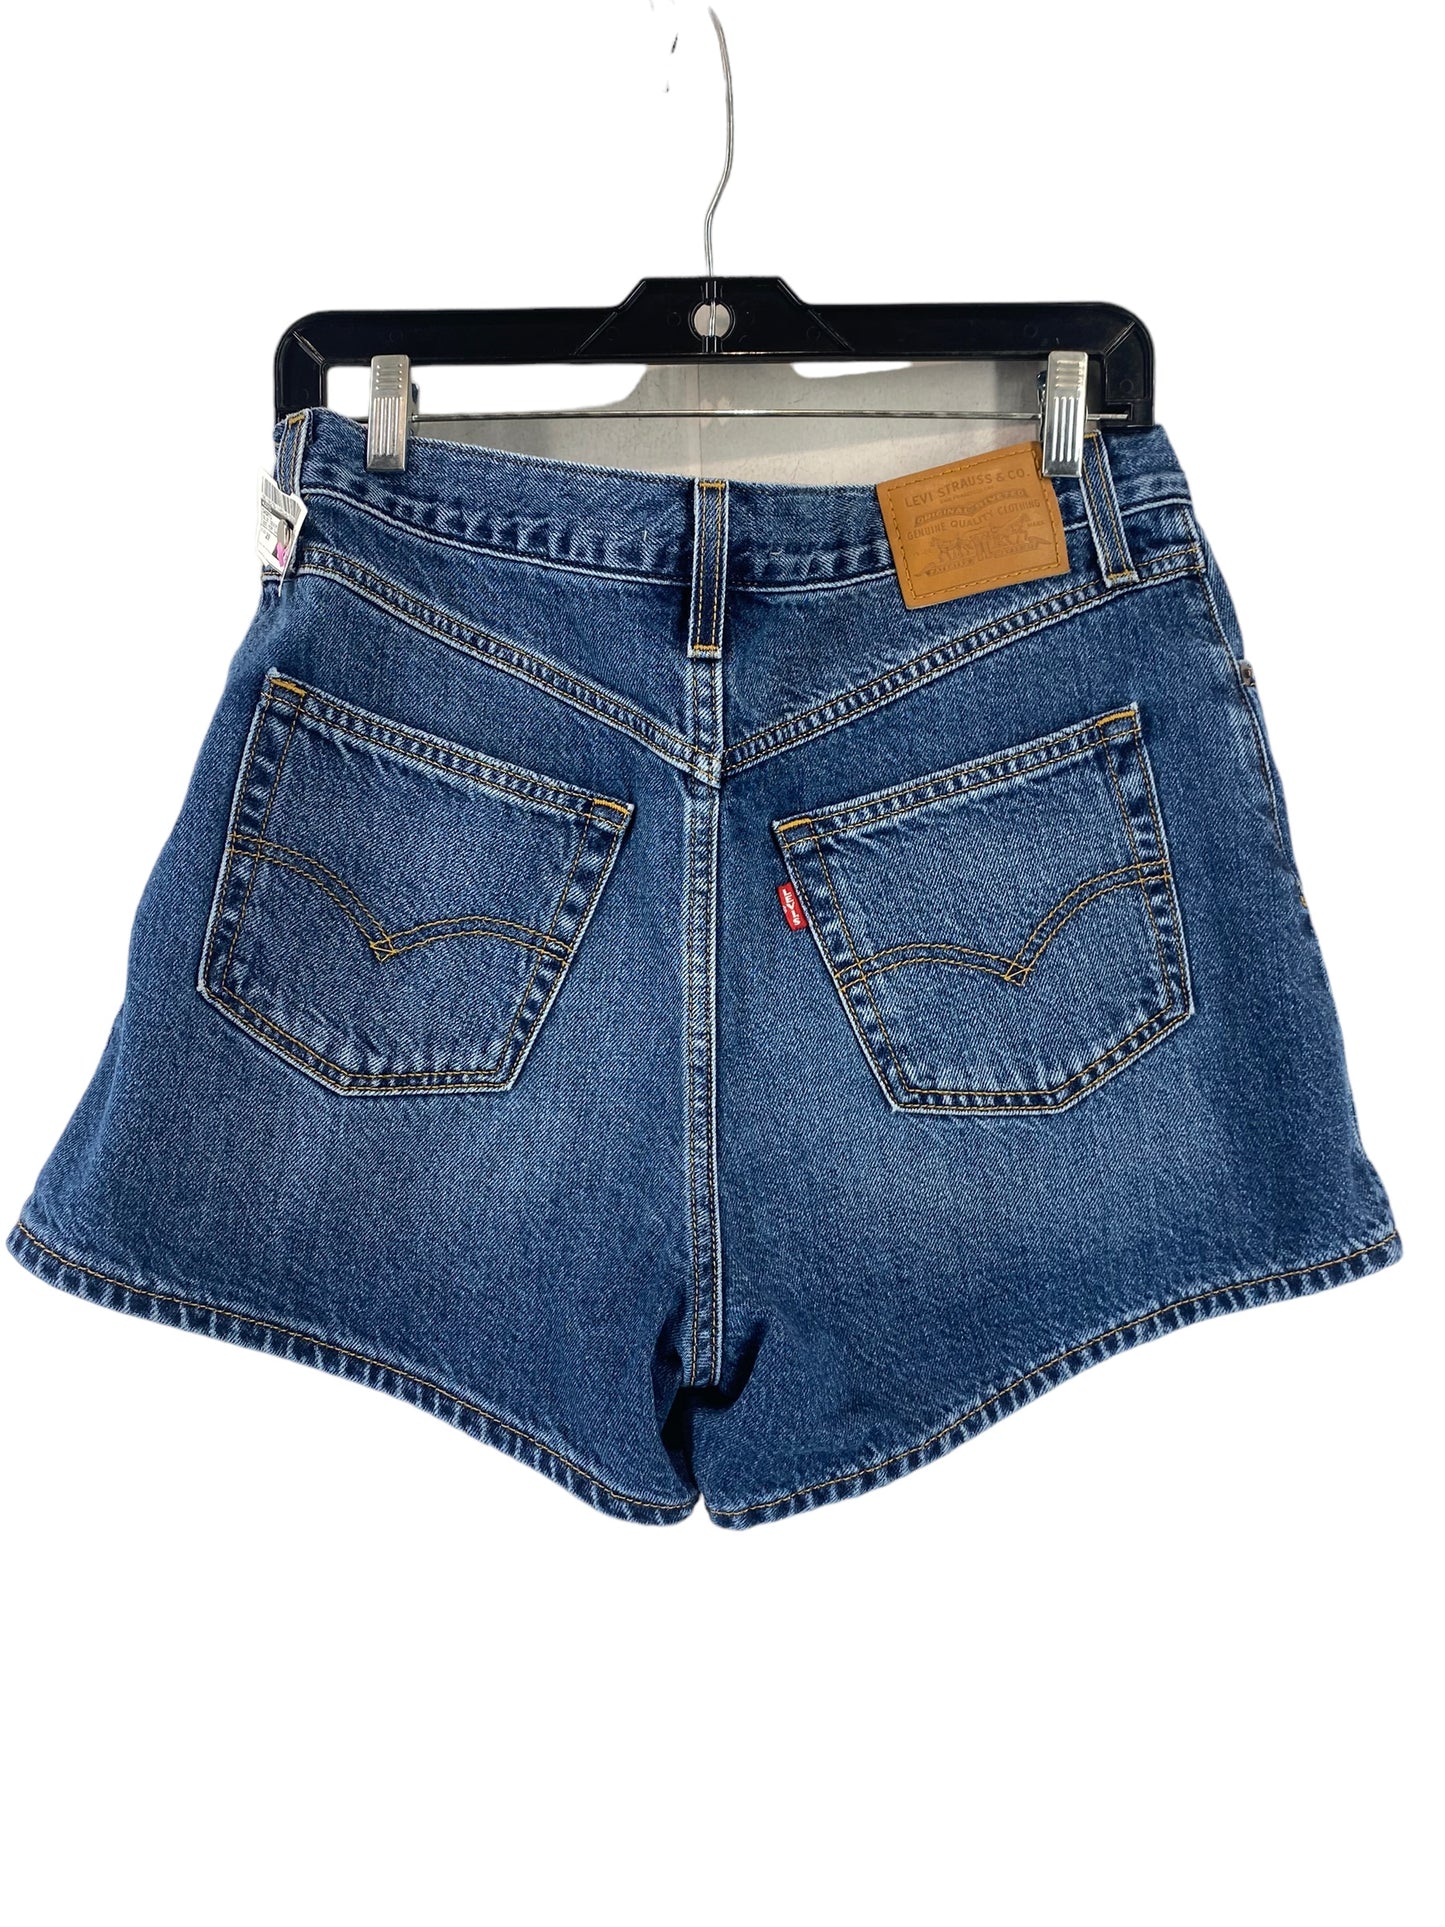 Shorts By Levis  Size: 29